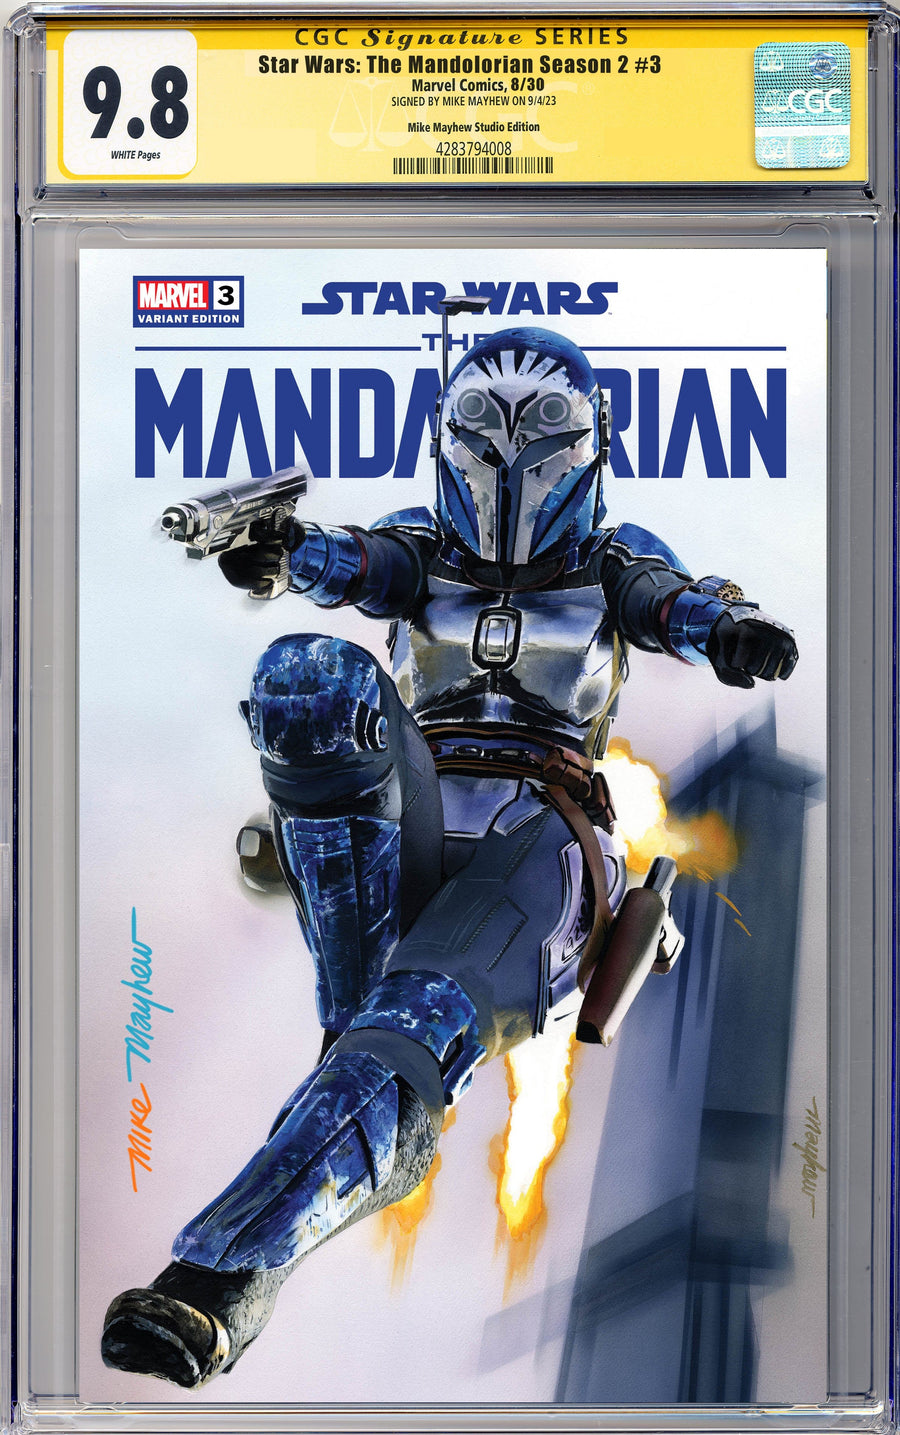 STAR WARS: THE MANDALORIAN SEASON 2 #3 Mike Mayhew Studio Variant Cover A Trade Dress Full Duo Sig CGC Yellow Label 9.6 and Above Graded Slab